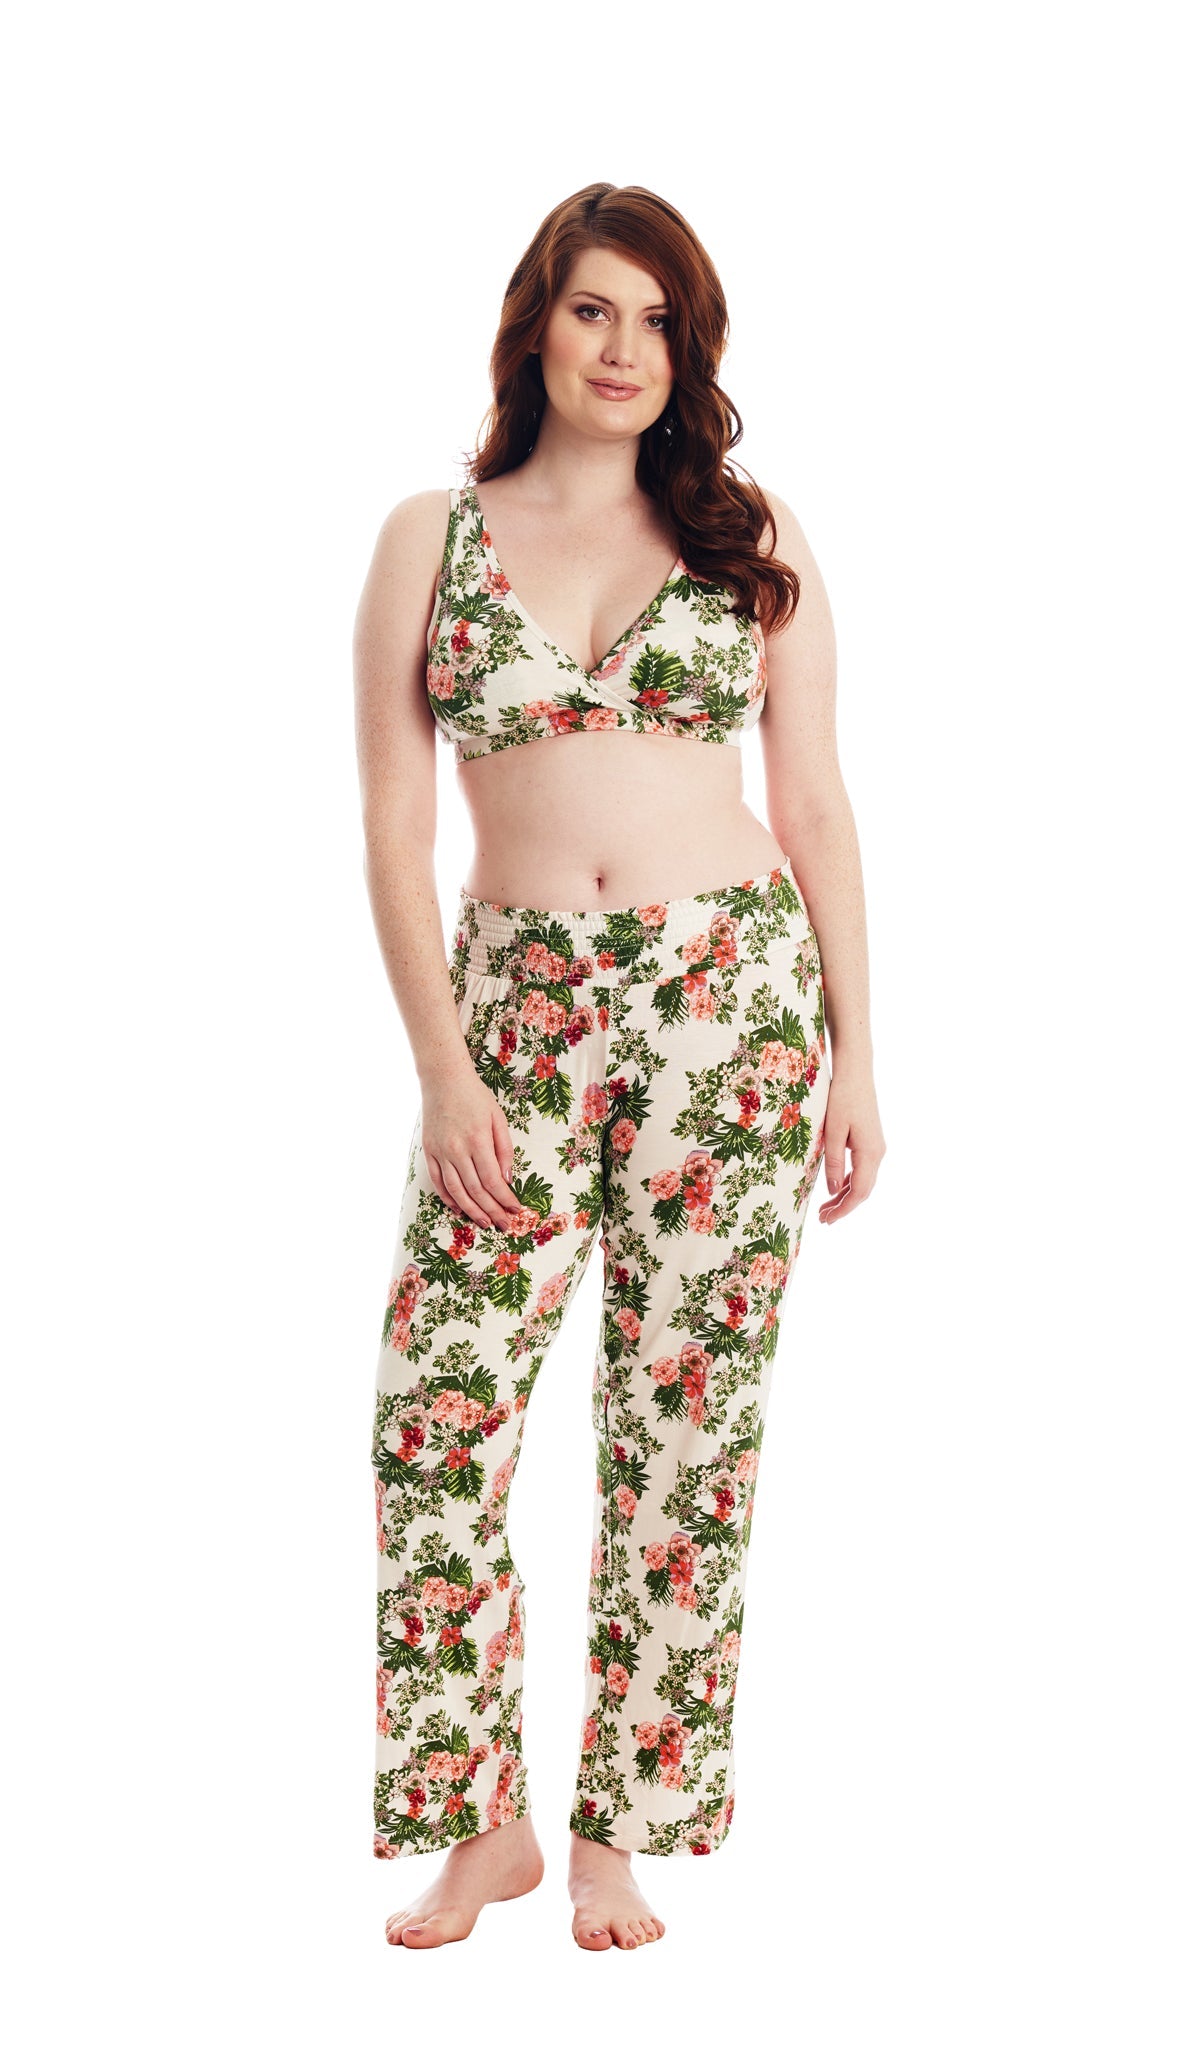 Beige Floral Paisley Single Bra. Full length shot of woman wearing Beige Floral print bra and matching pant.